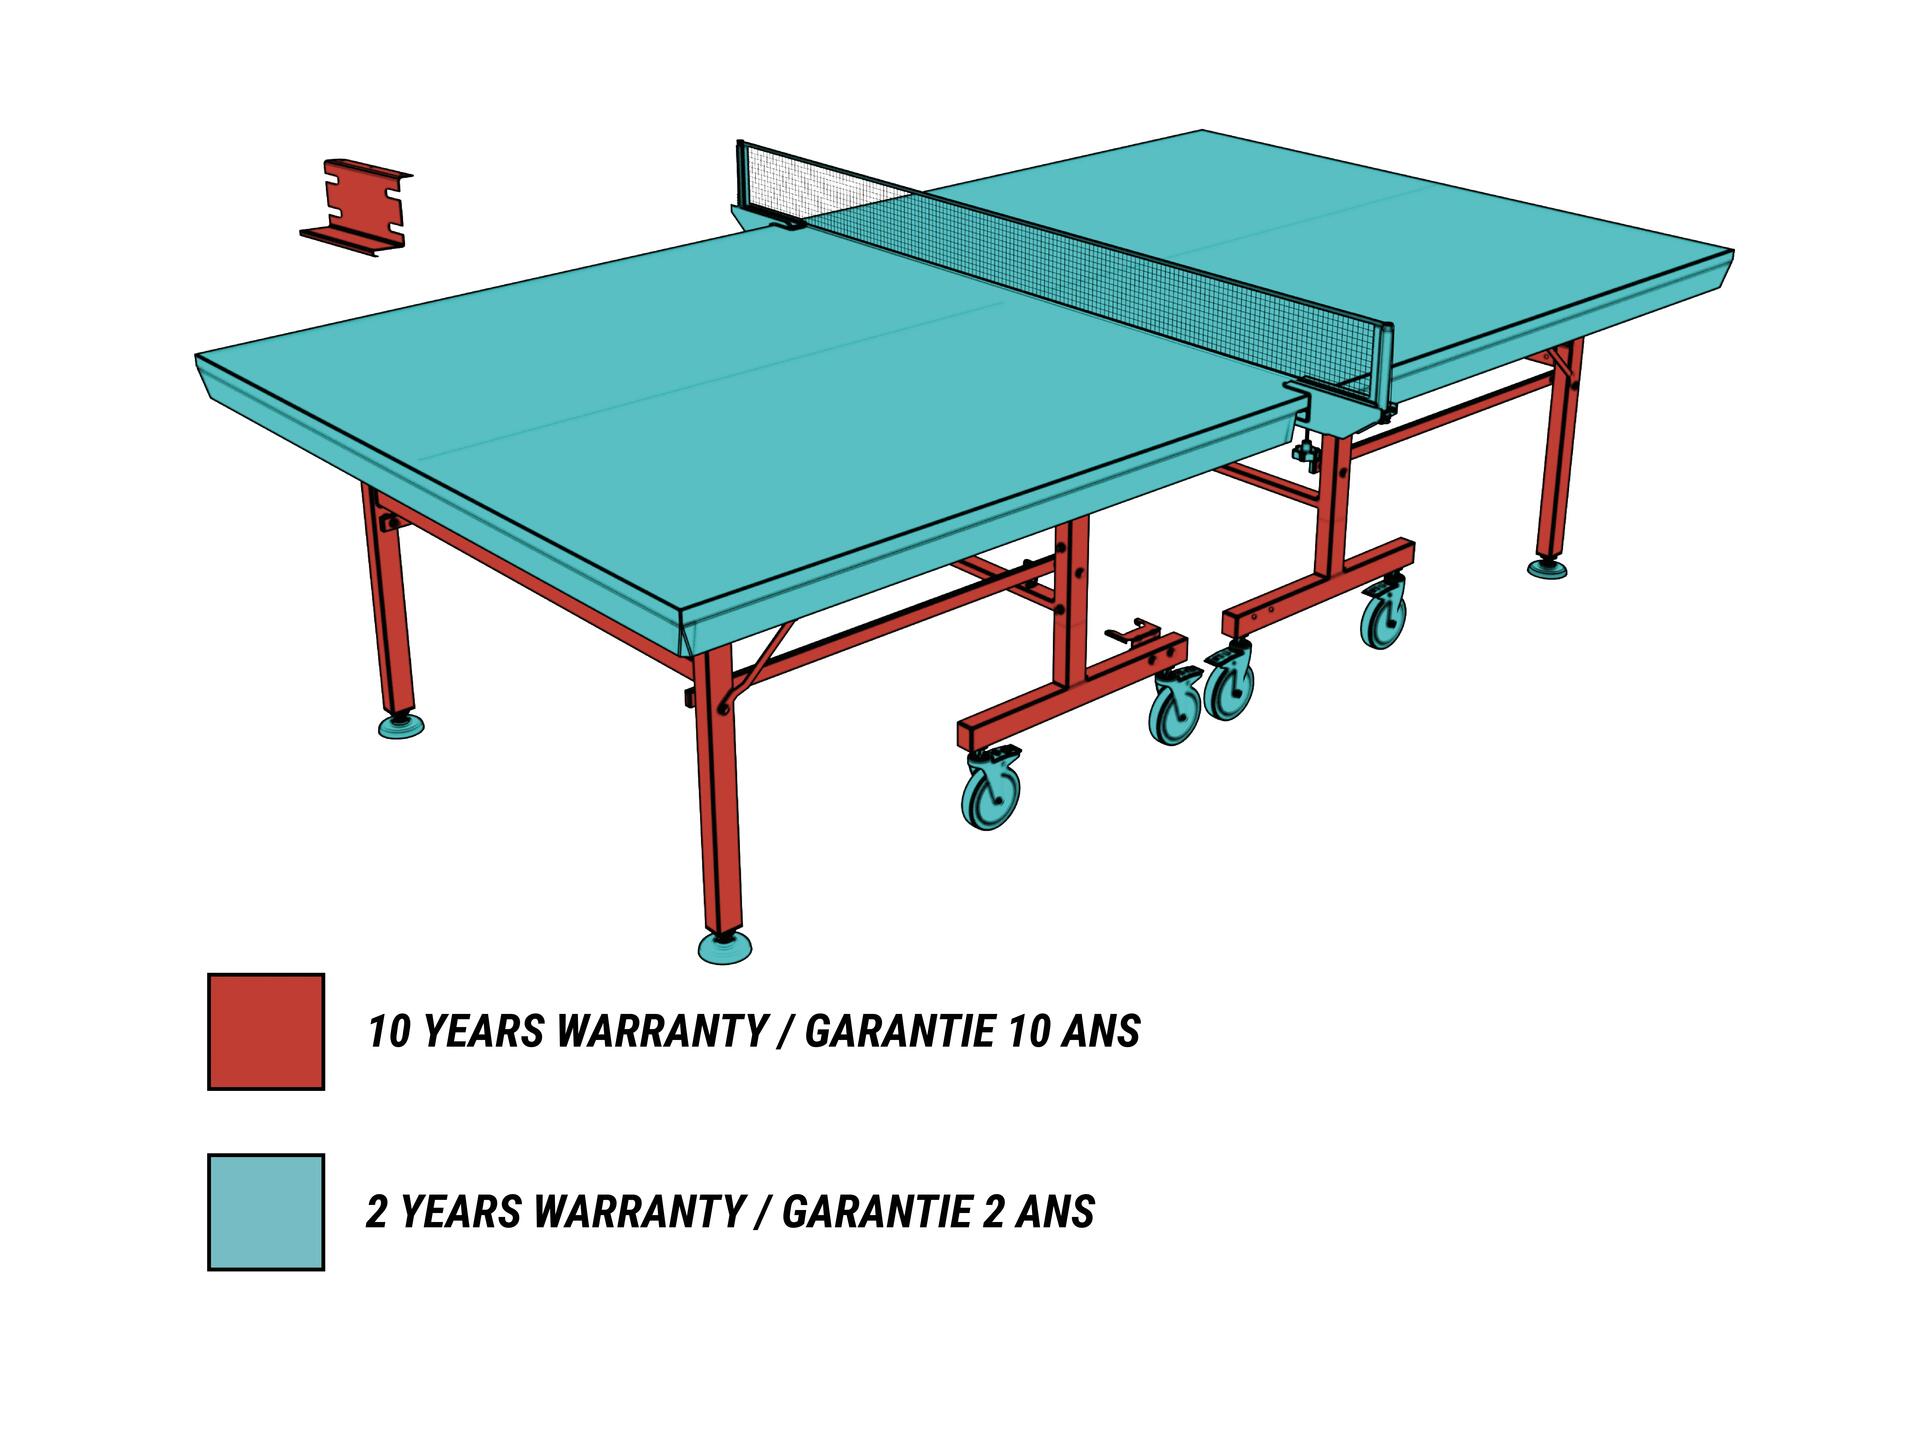 OUR TABLES COME WITH A TEN-YEAR WARRANTY